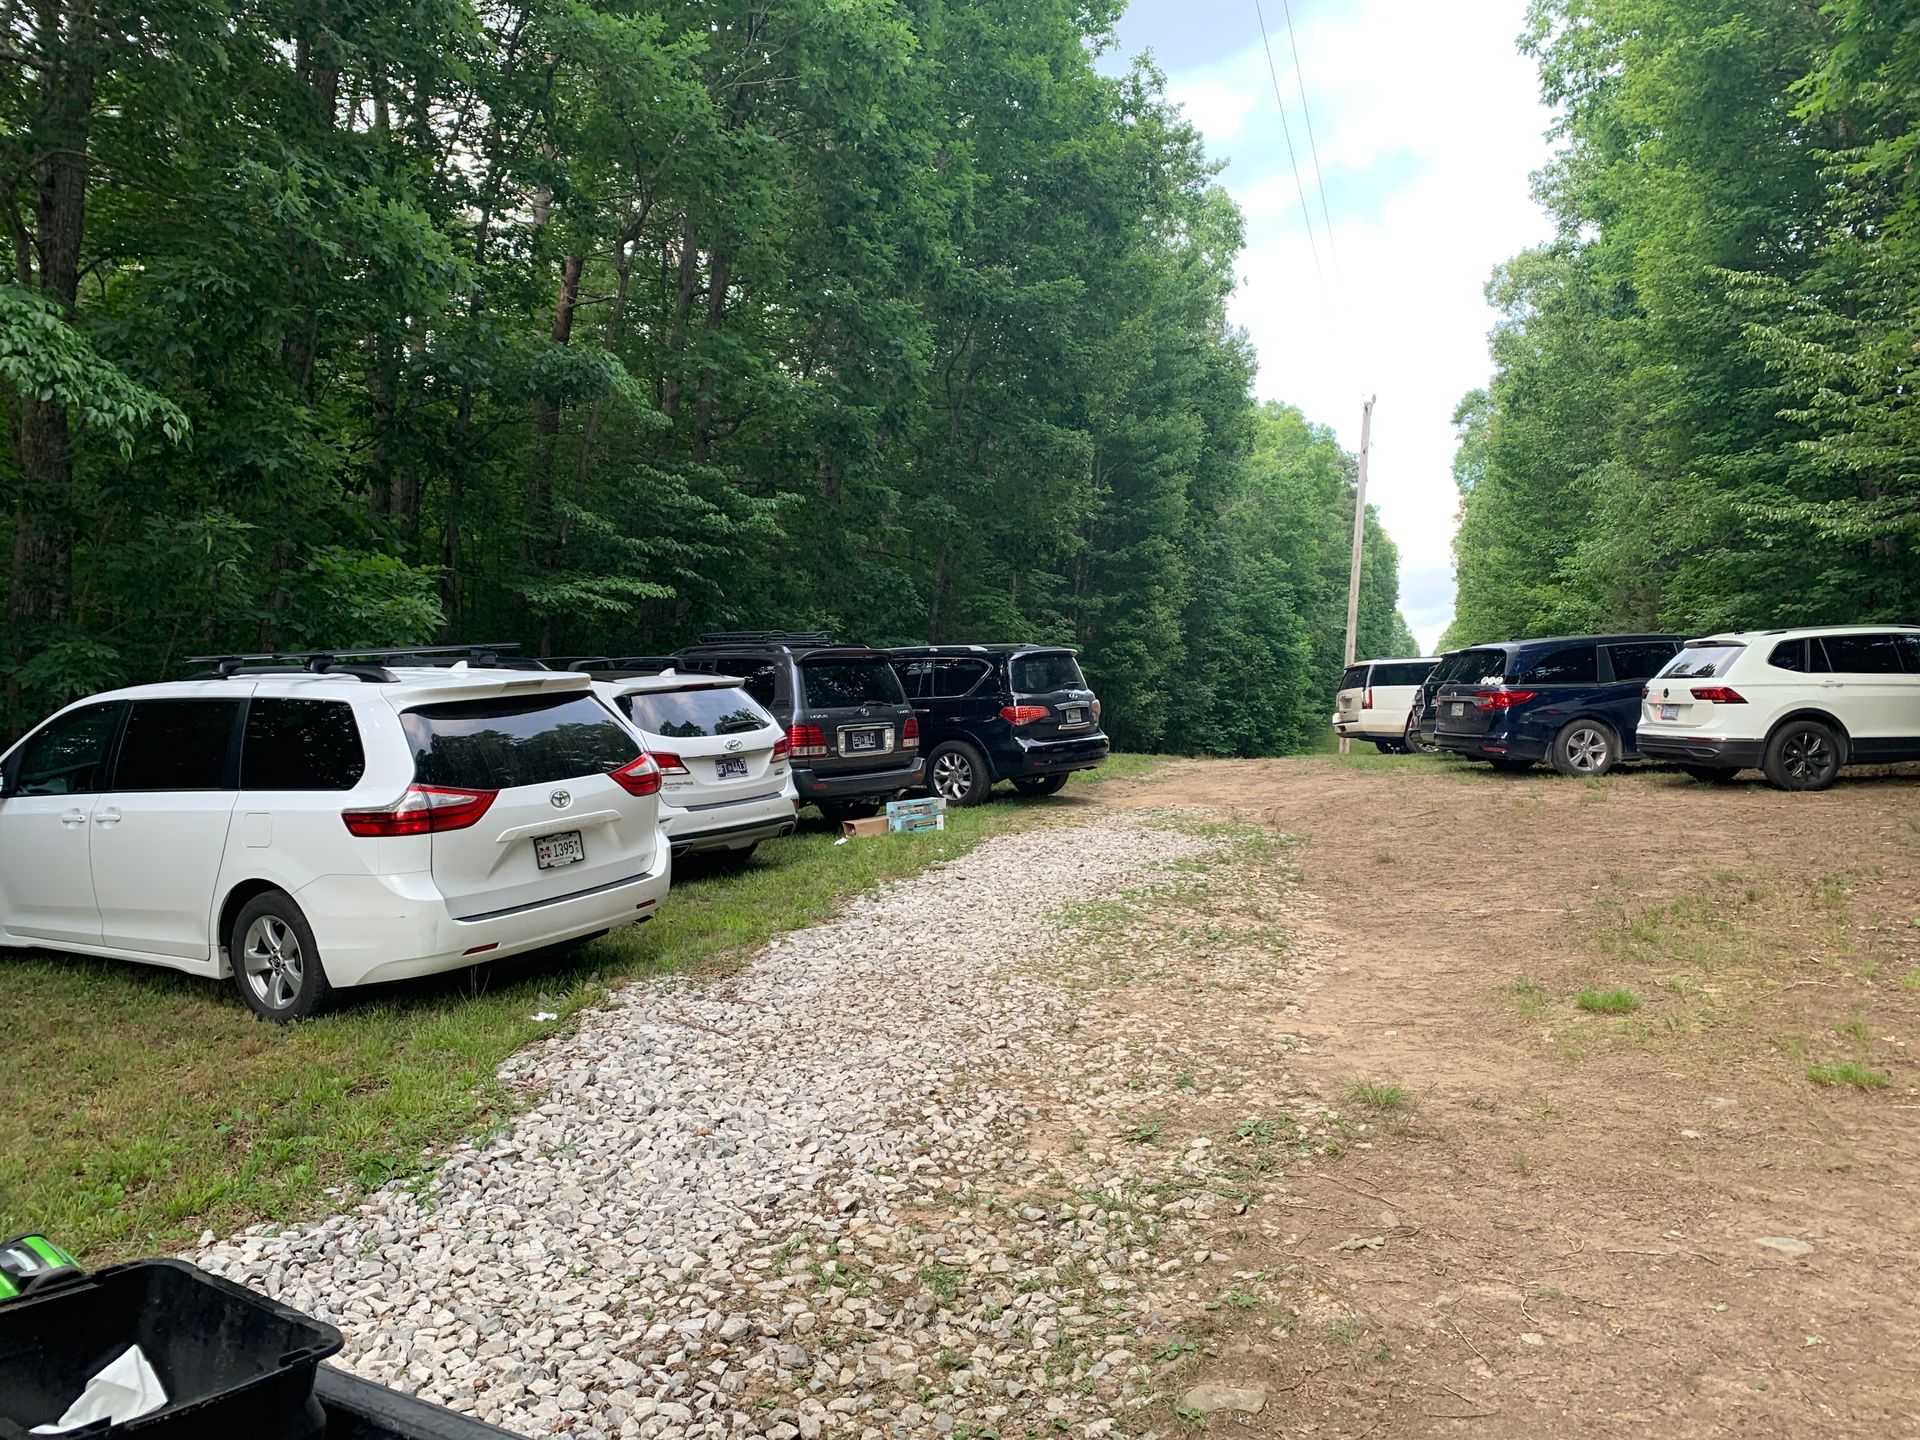 A row of cars are parked in a gravel lot in the woods.